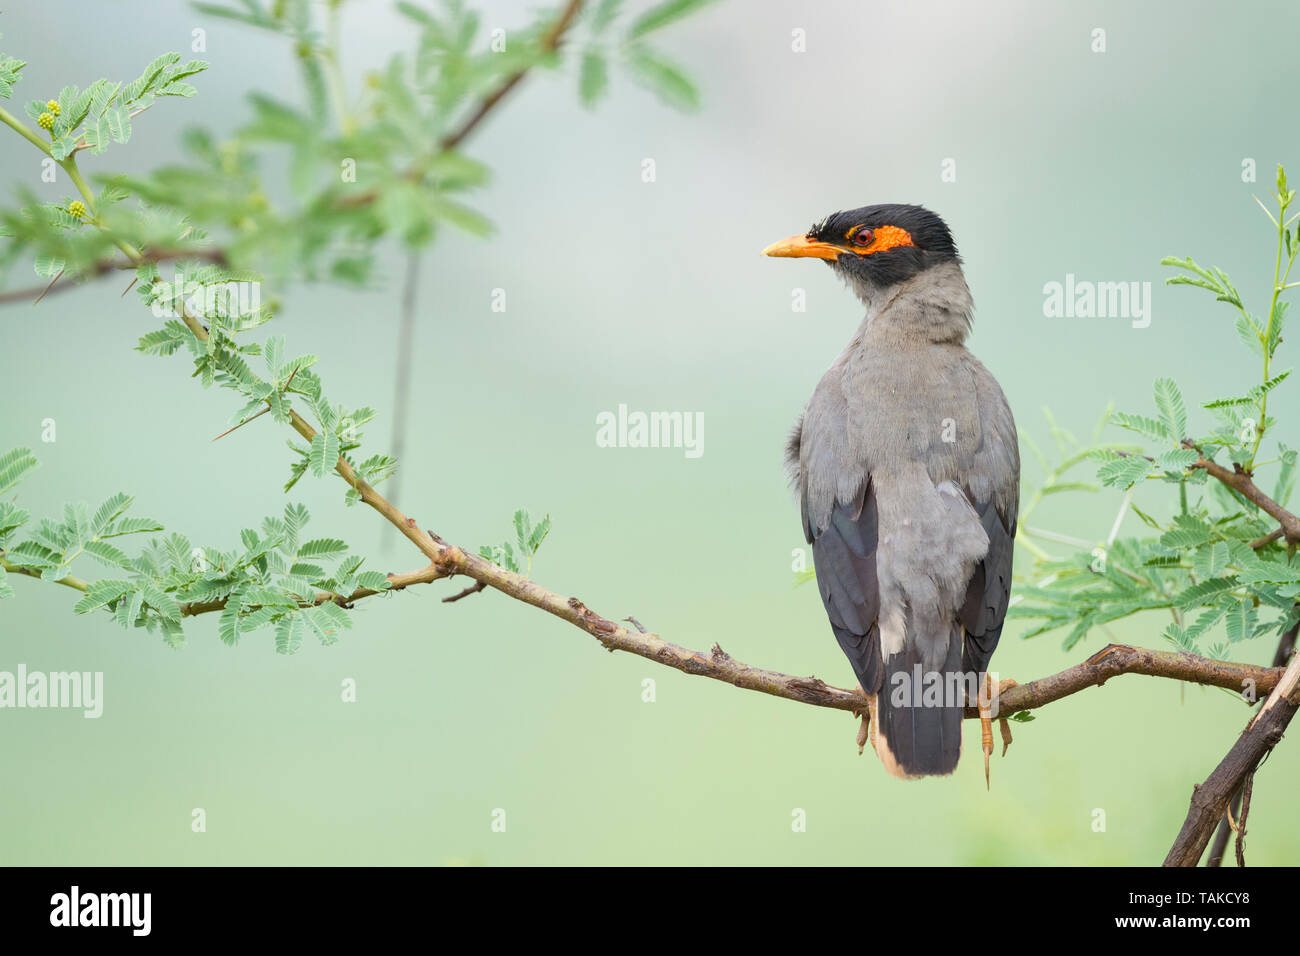 Bank Myna (Acridotheres ginginianus) perched on branch. Rajasthan. India. Stock Photo